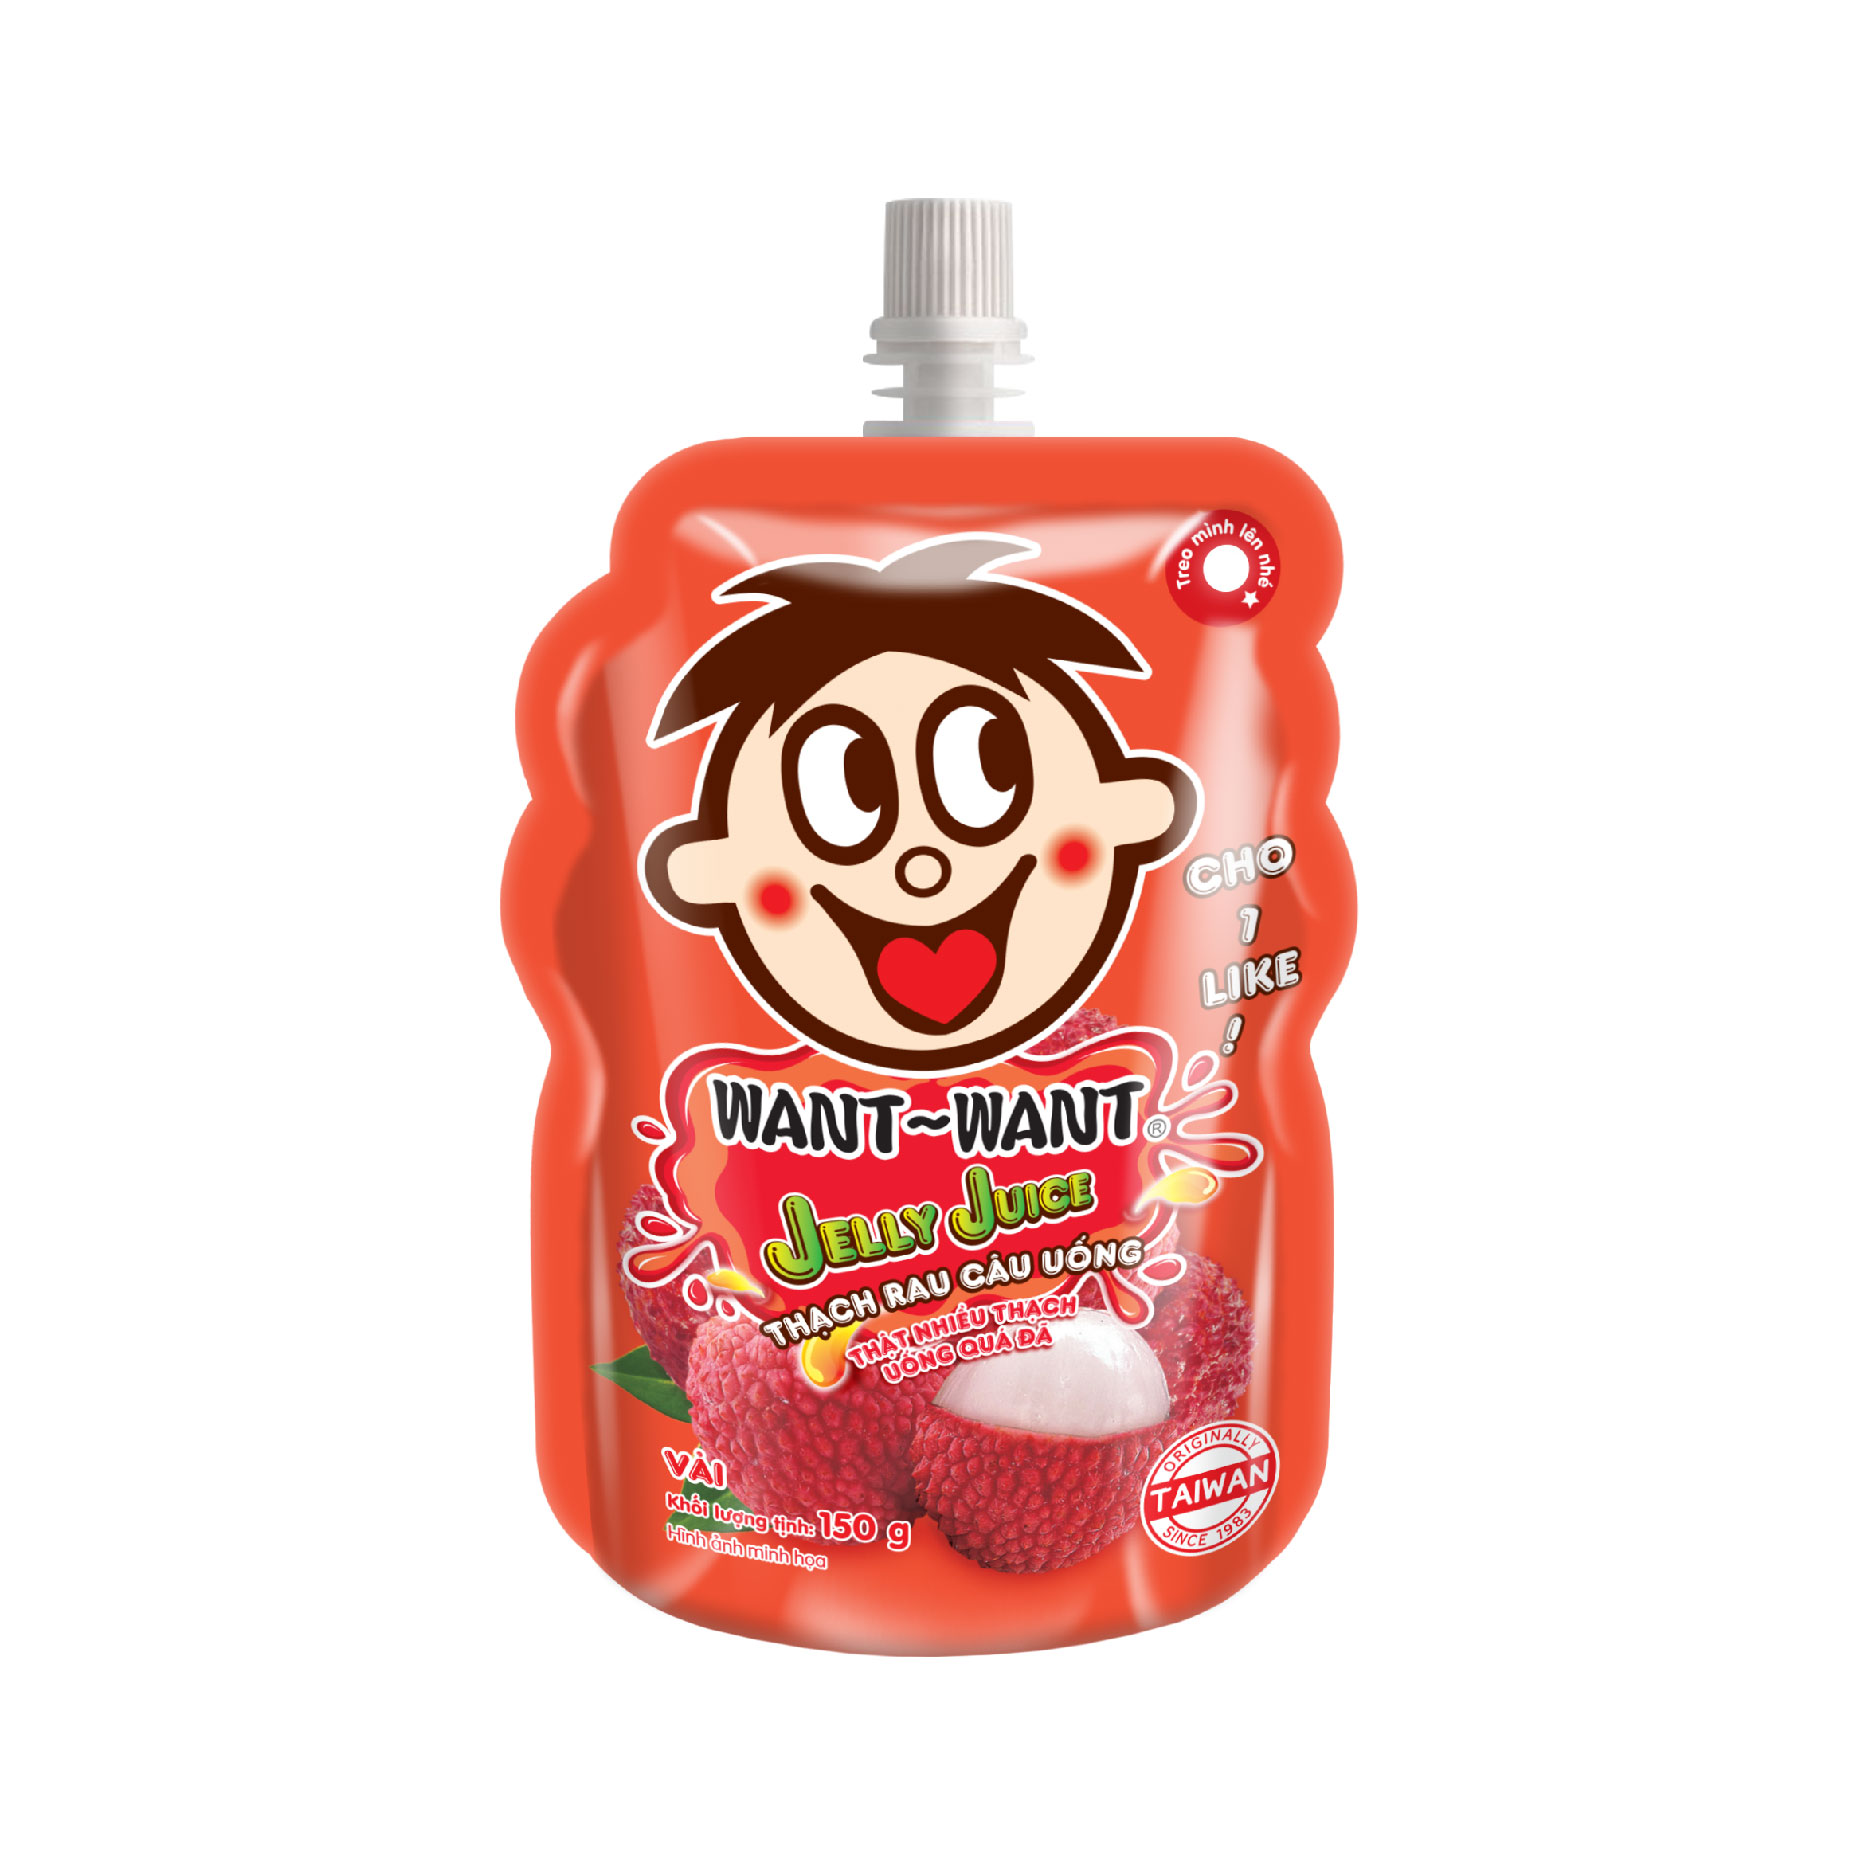 WANT WANT Jelly Juice Lechee Flavor 150g